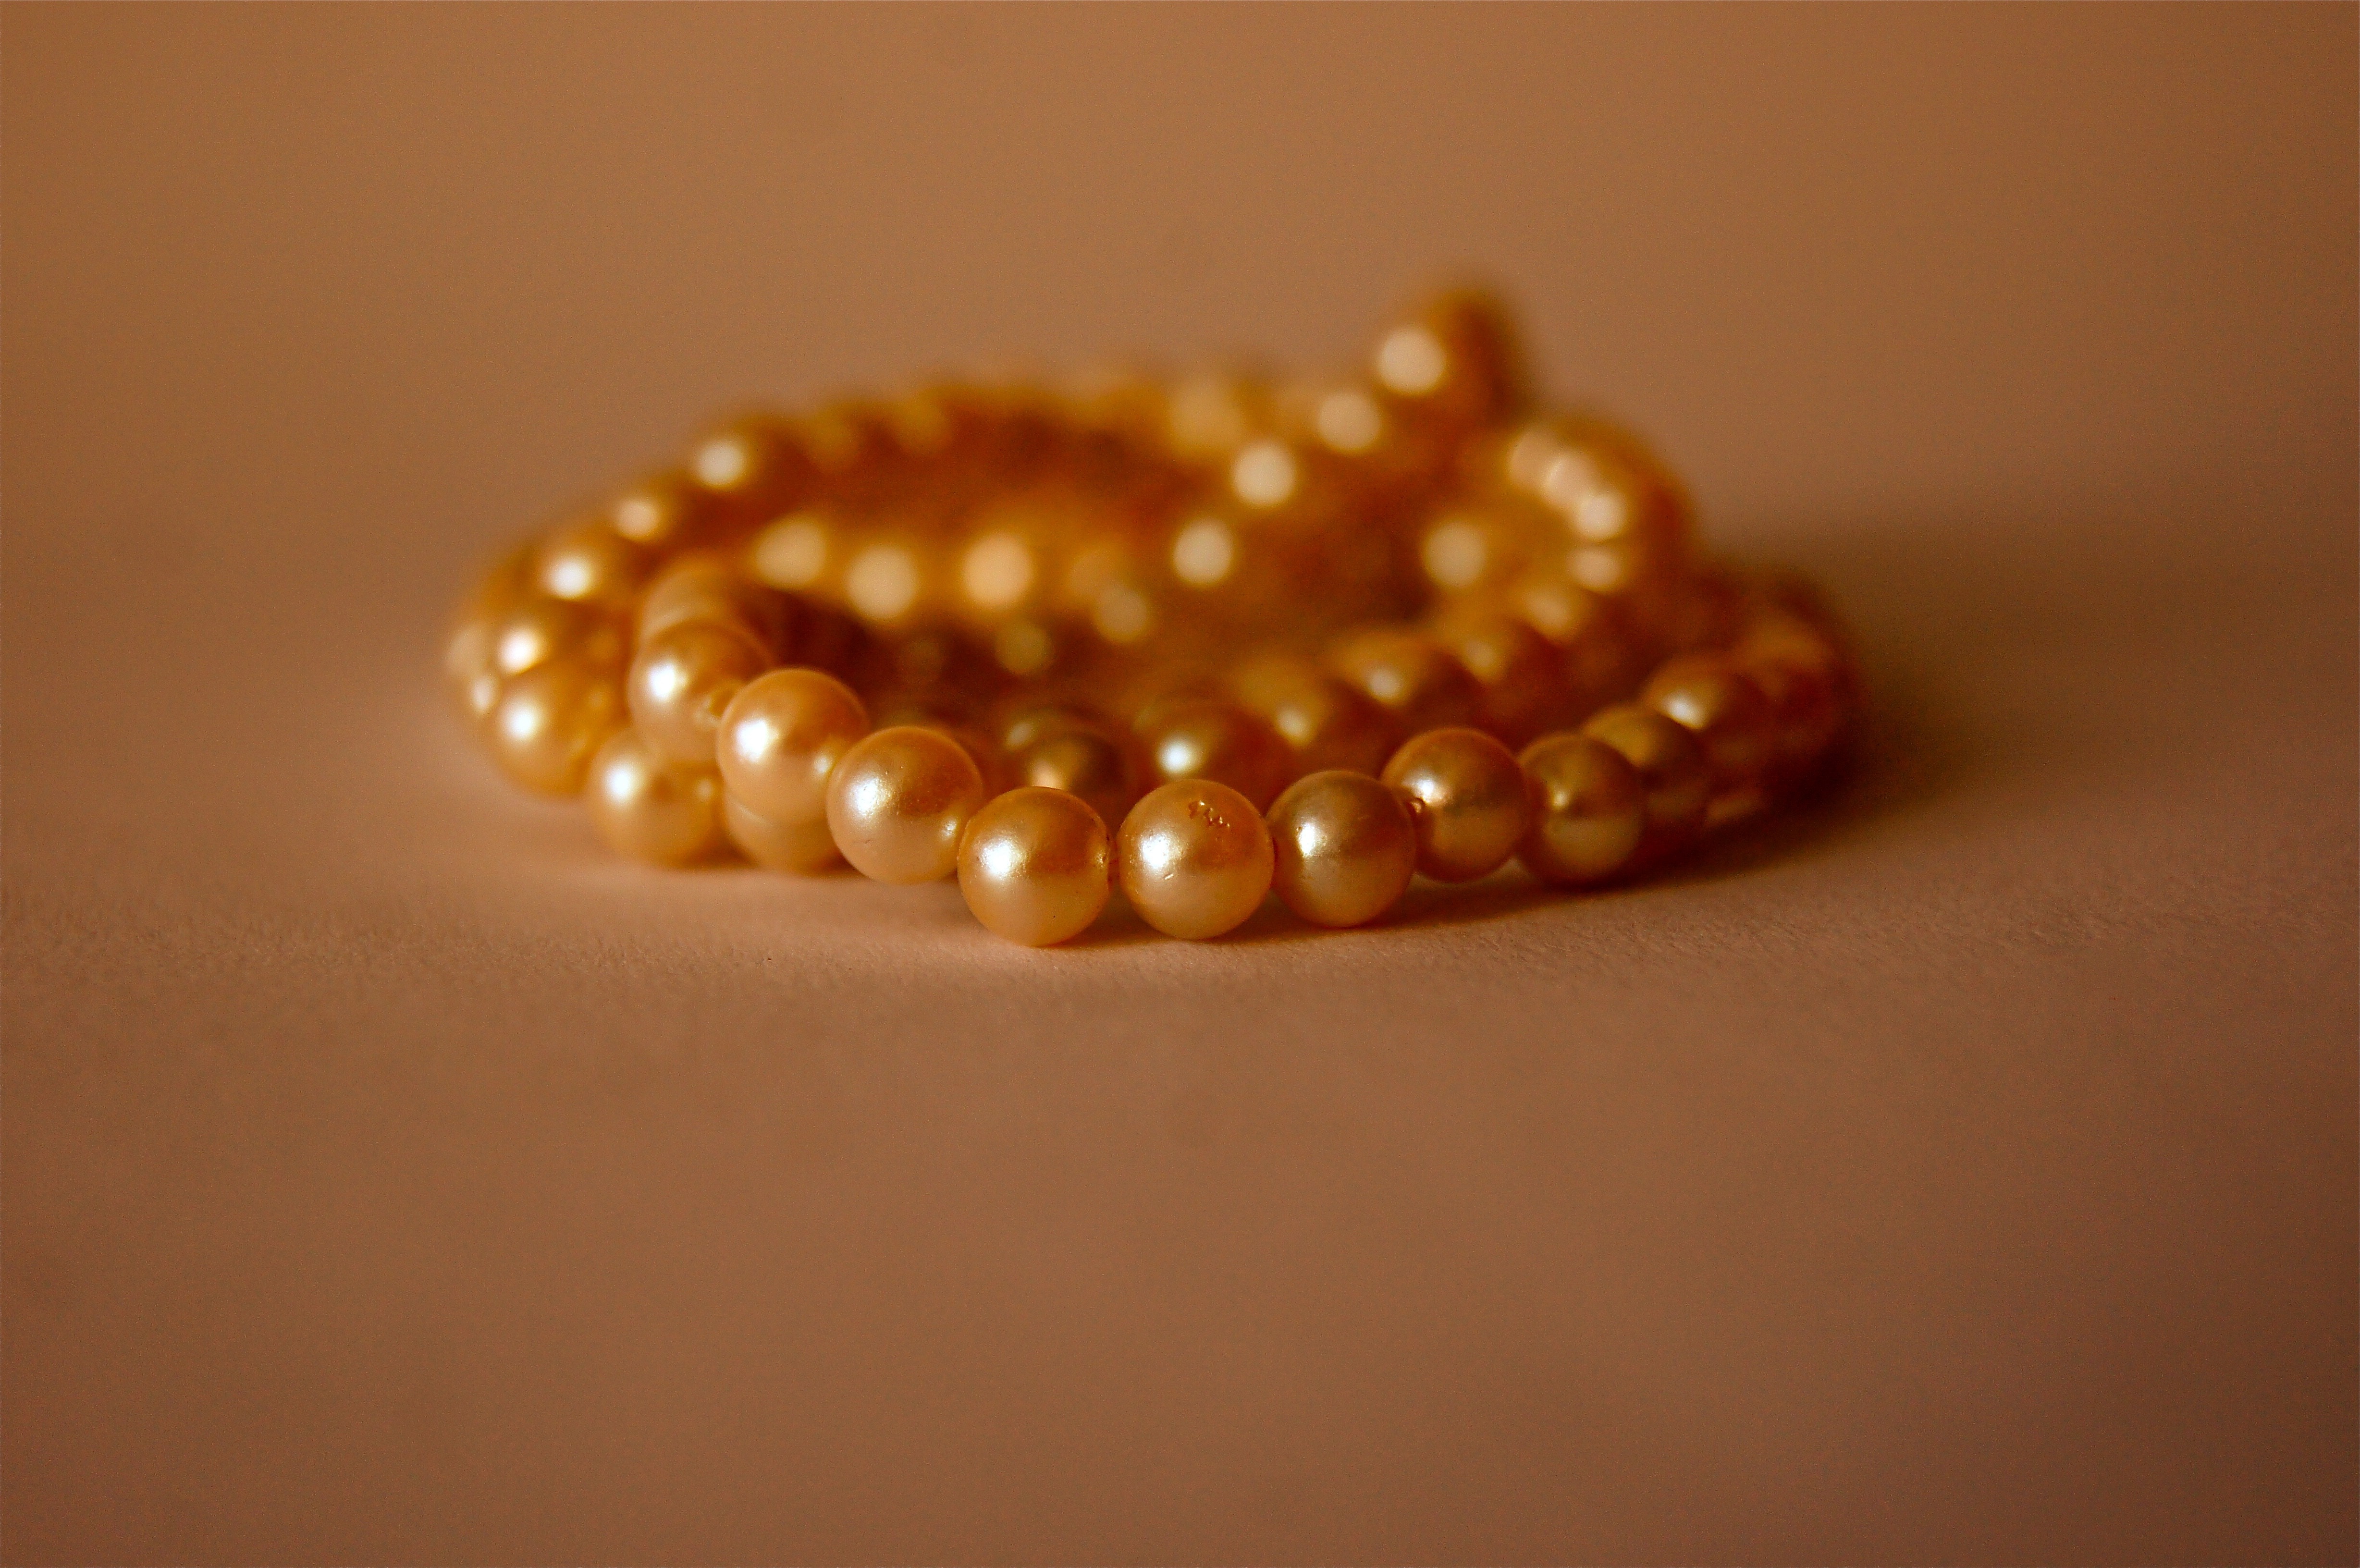 orange pearl necklace on brown concrete surface